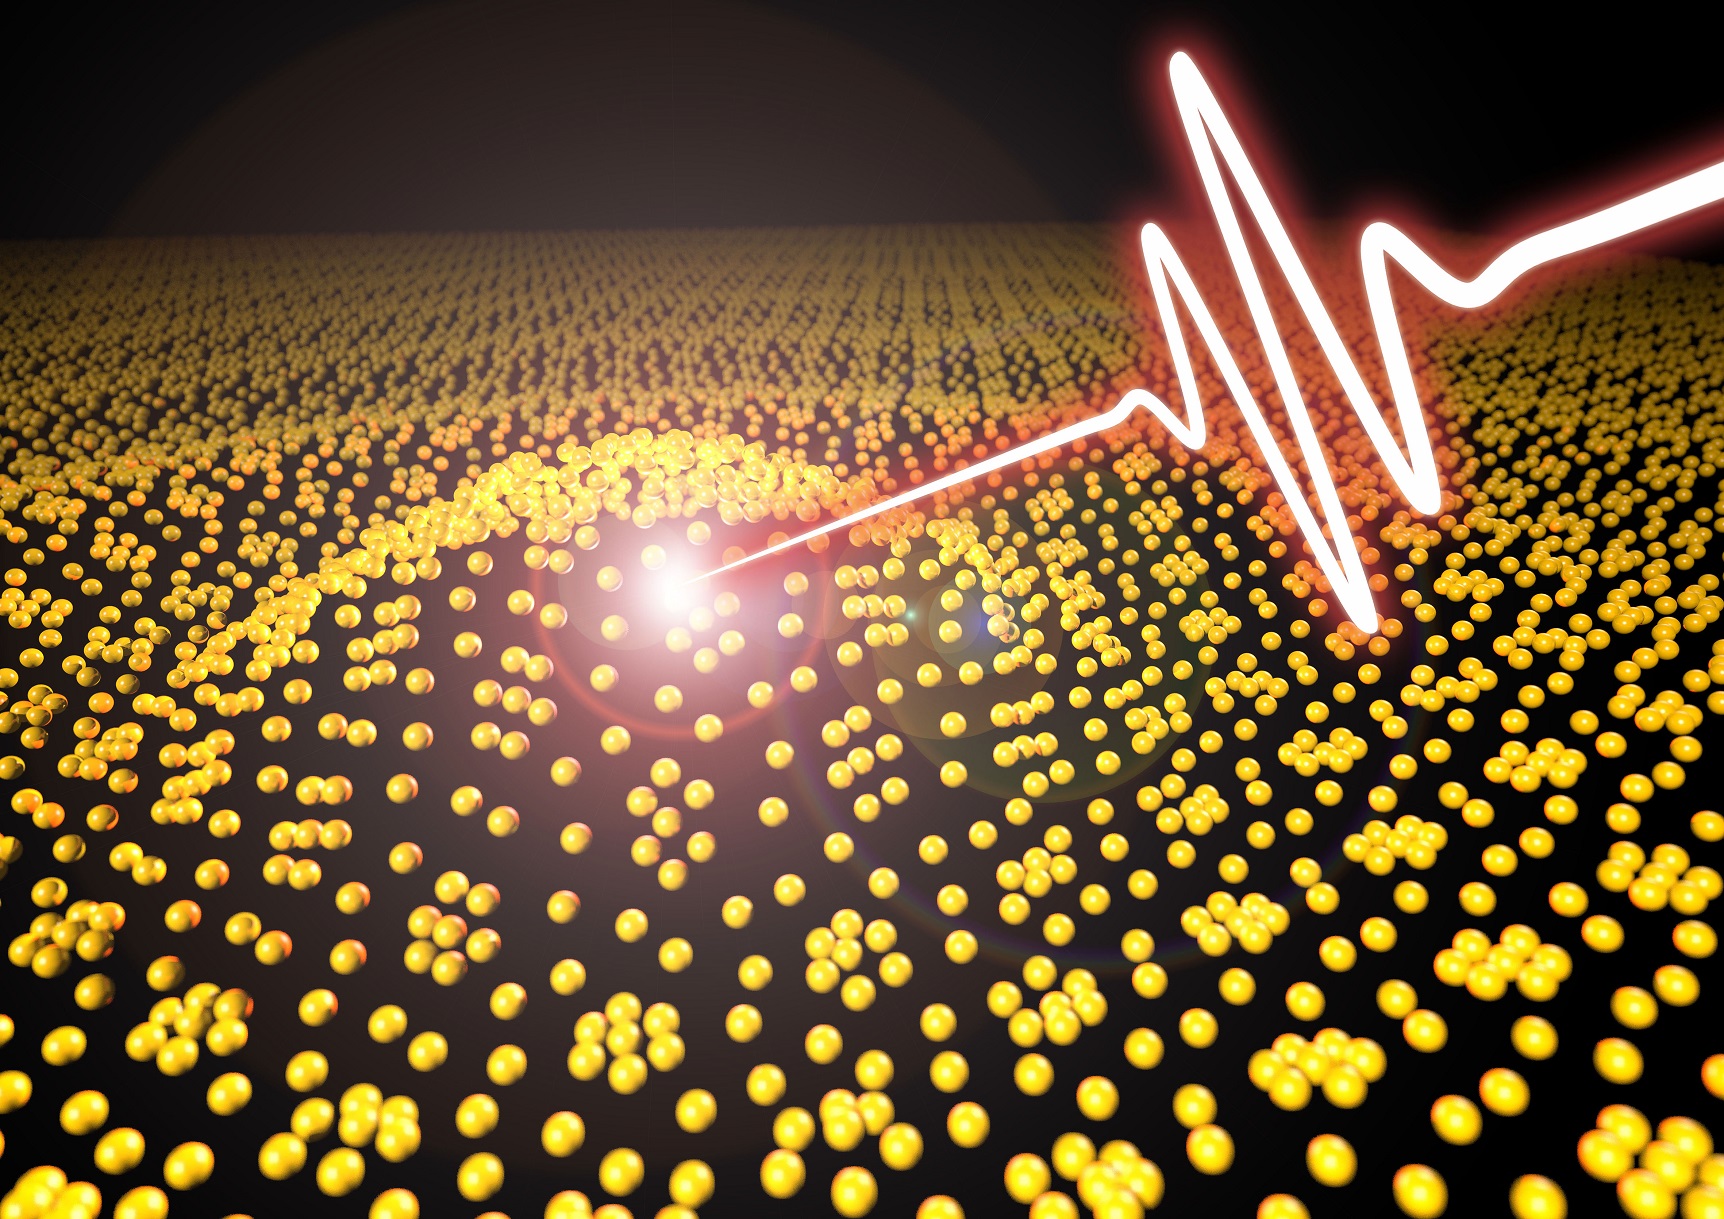 Illustration of the atomic lattice of a surface in which a phase change is triggered by a laser pulse.